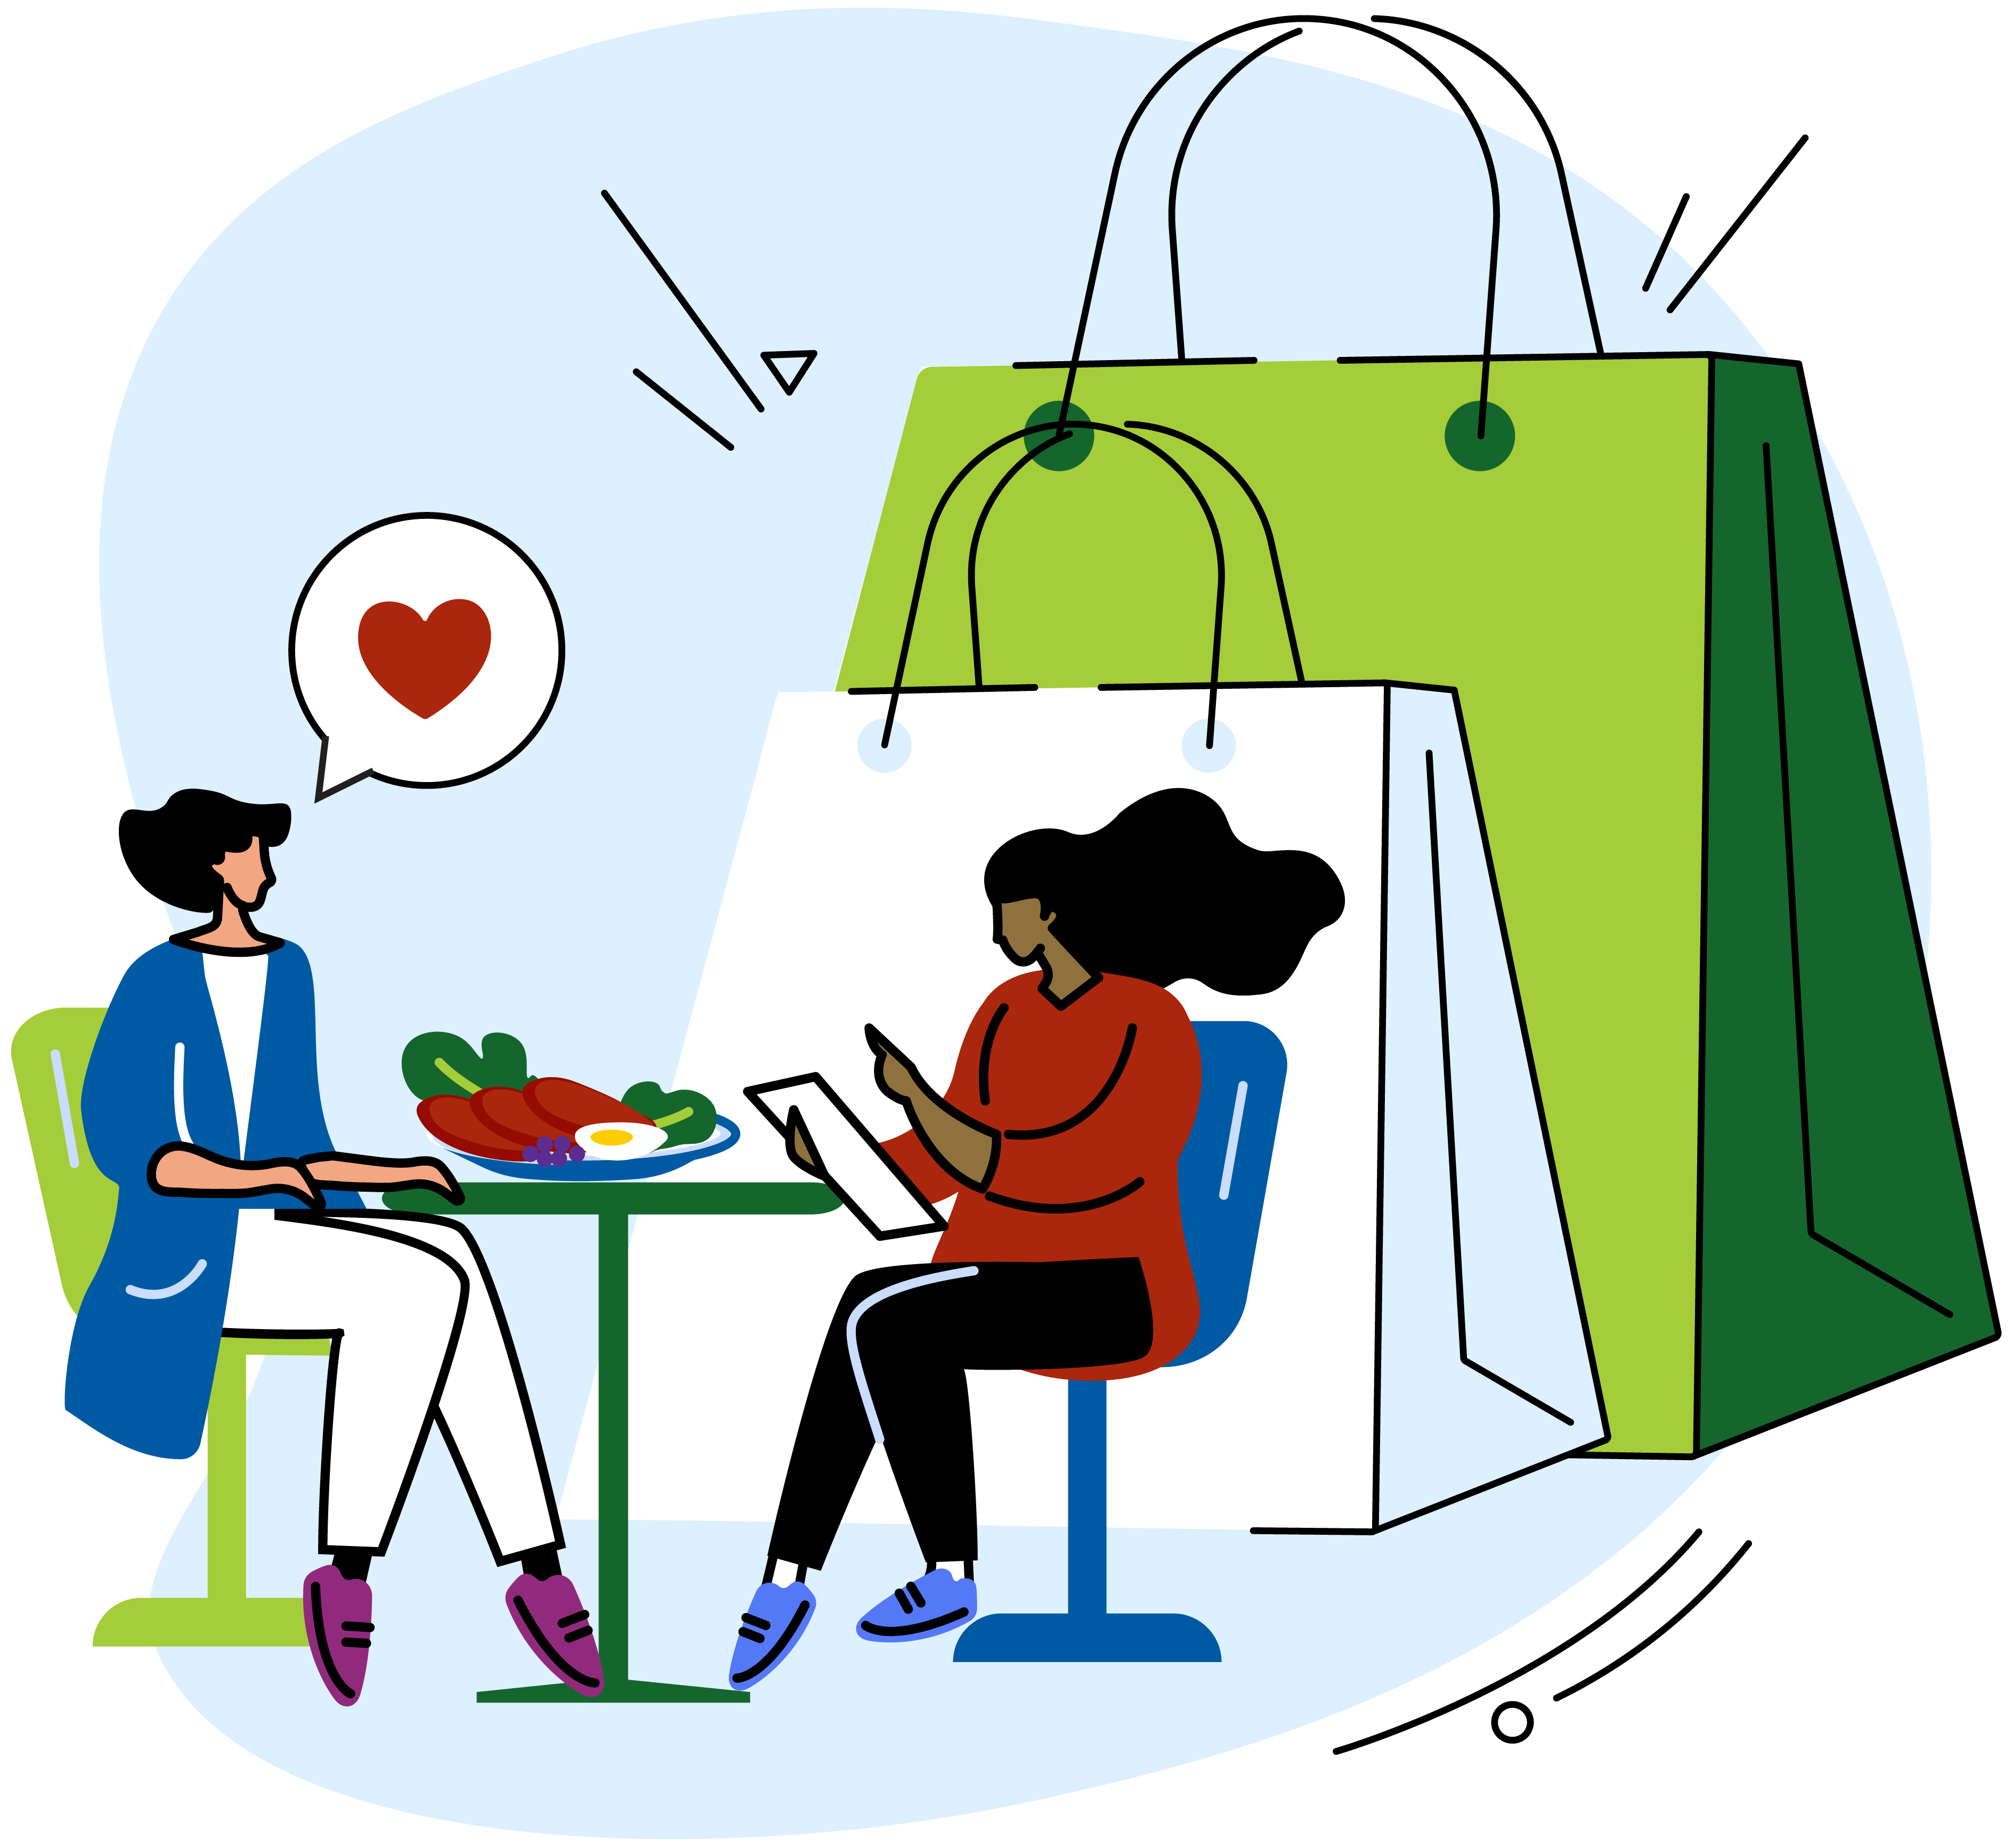 Illustration of two people having a meal, with two large shopping bags in the background